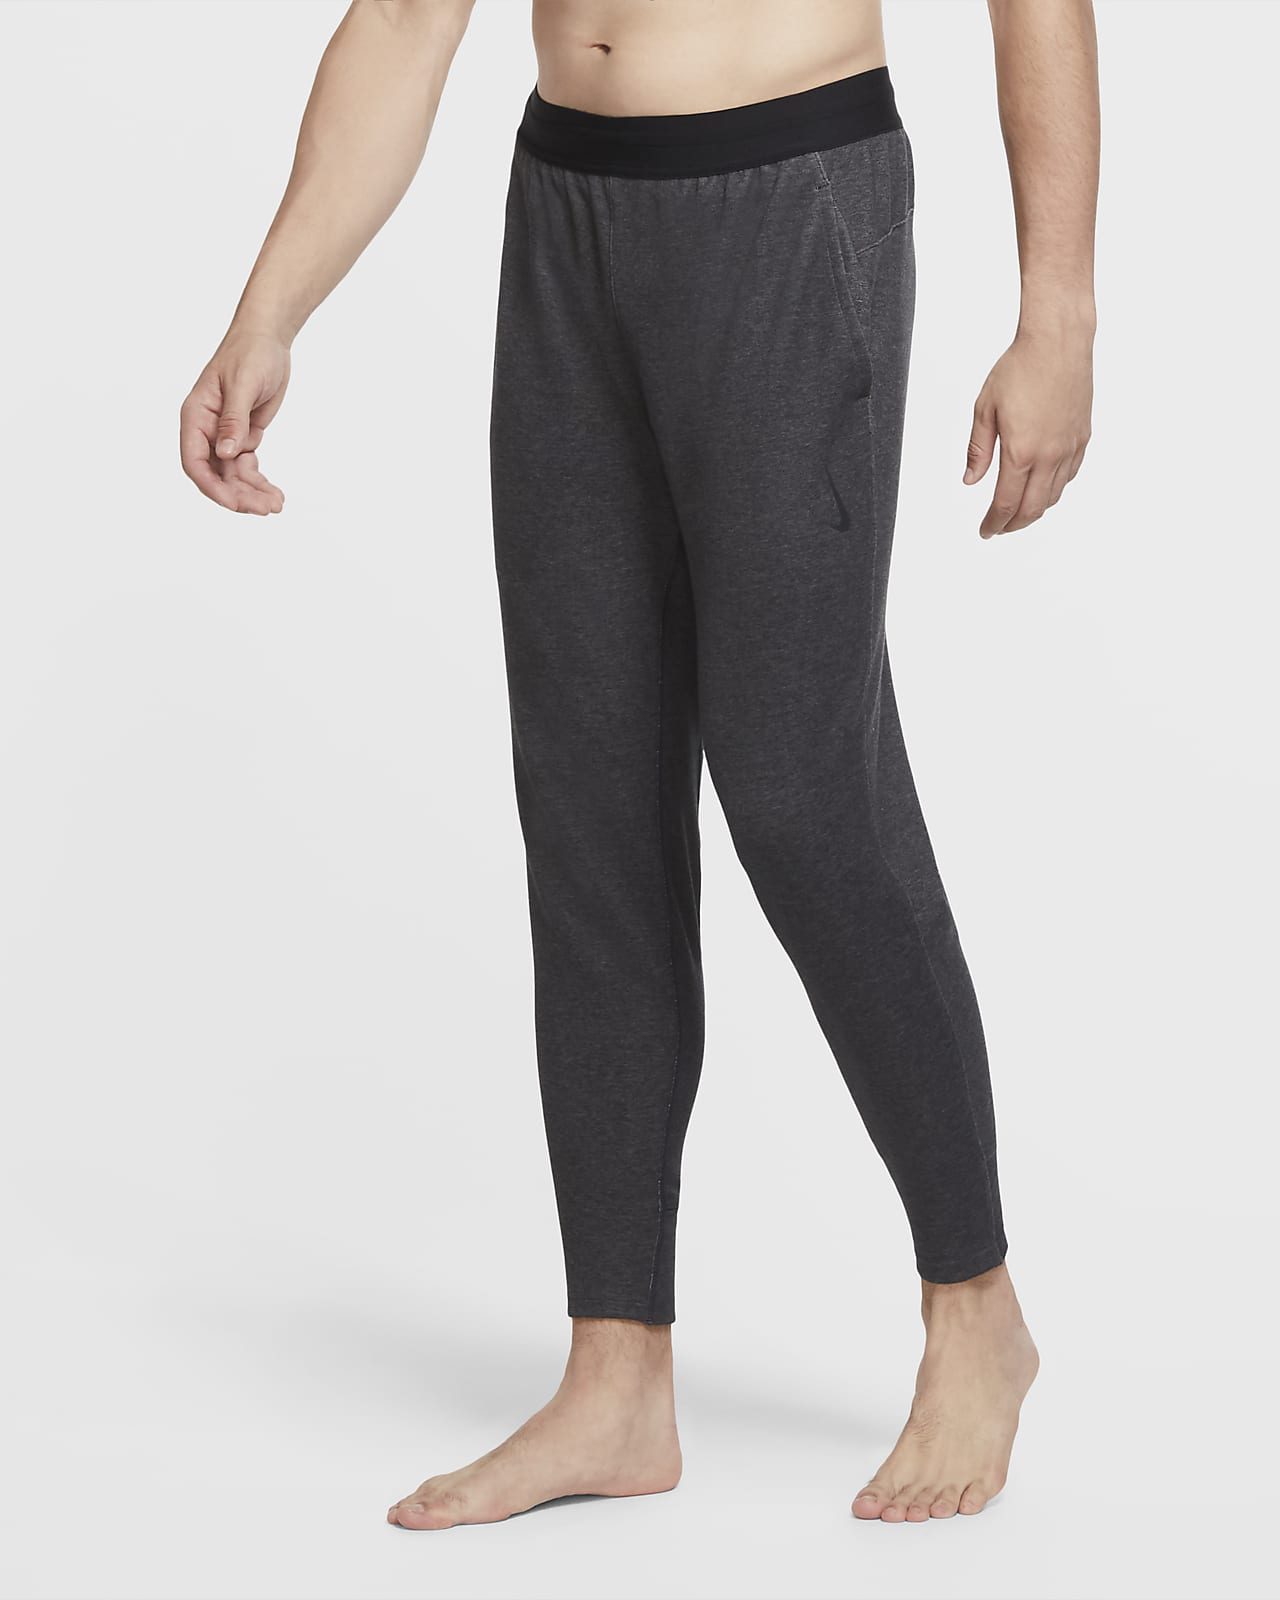  Nike Power Workout Pants for push your ABS